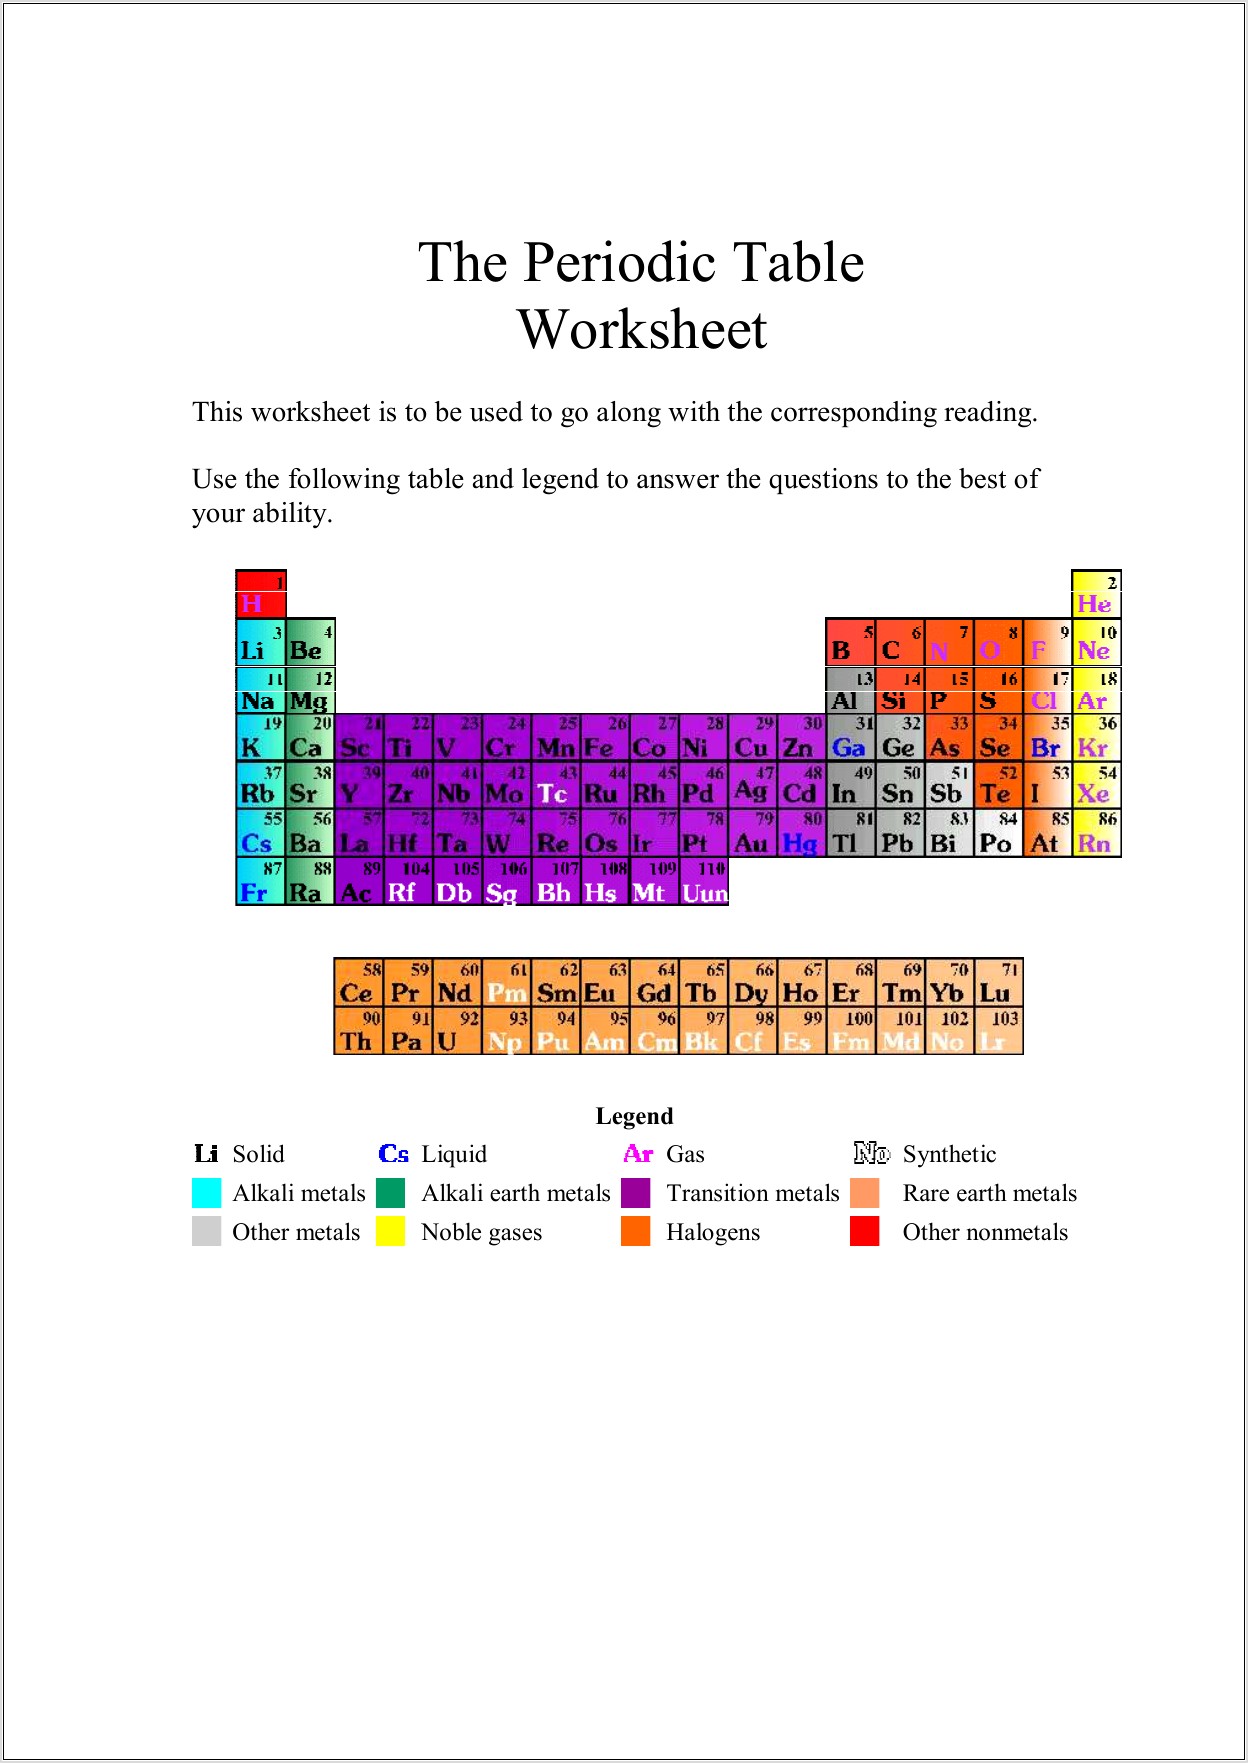 Periodic Table Worksheet 60 Questions